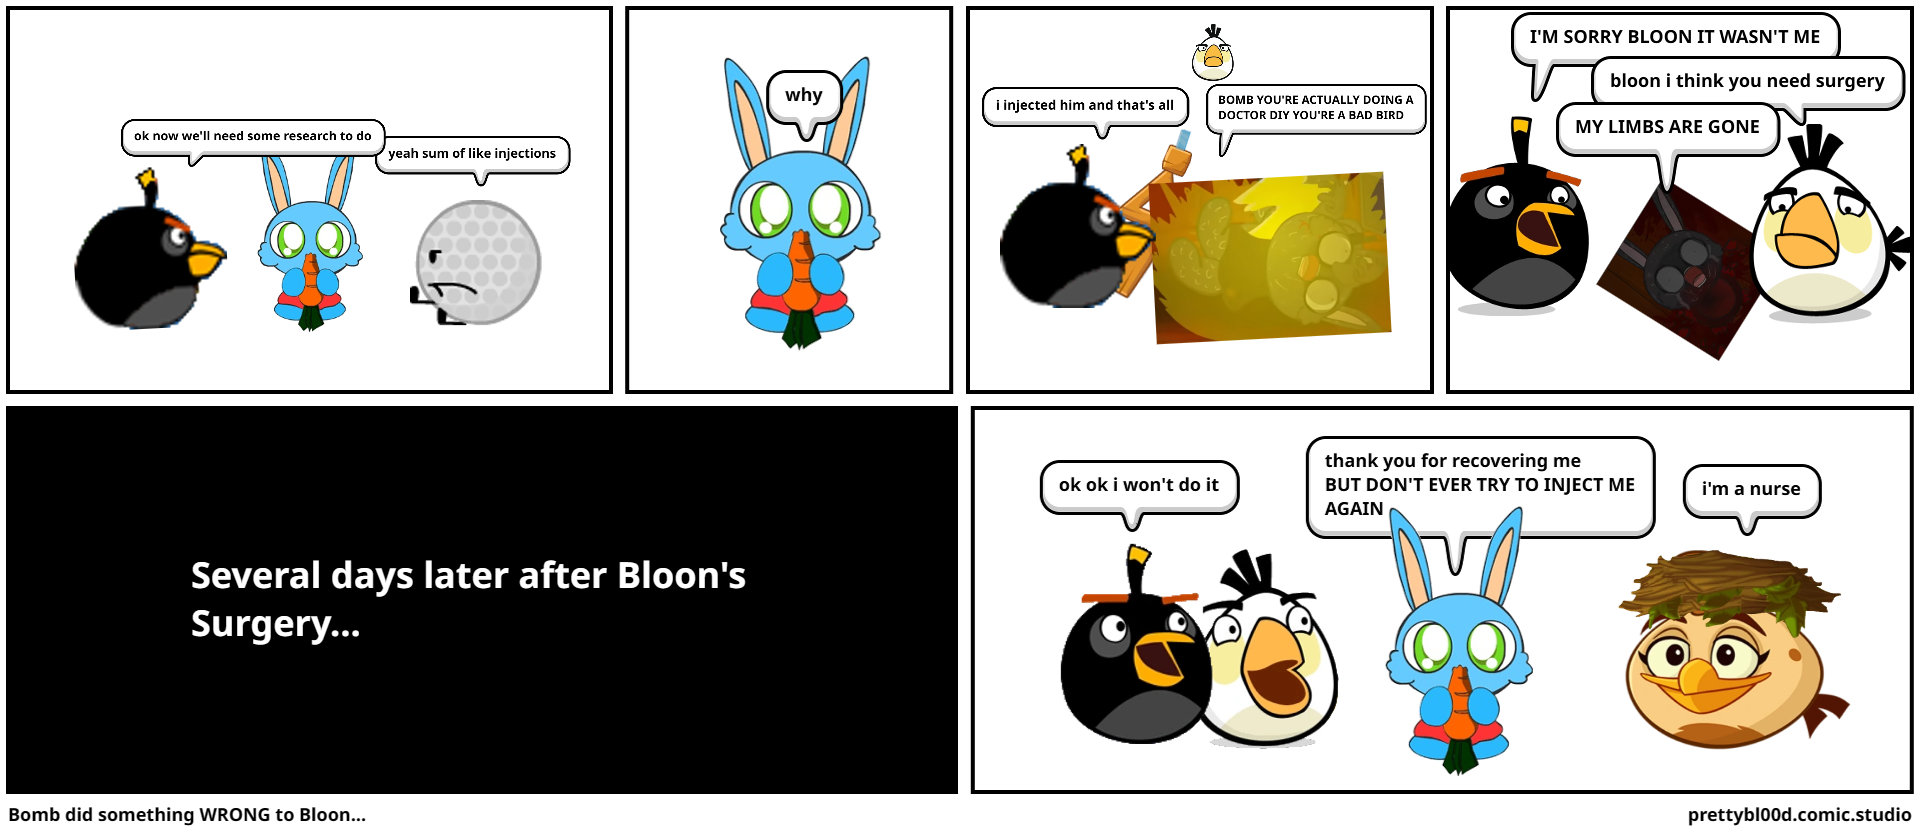 Bomb did something WRONG to Bloon...